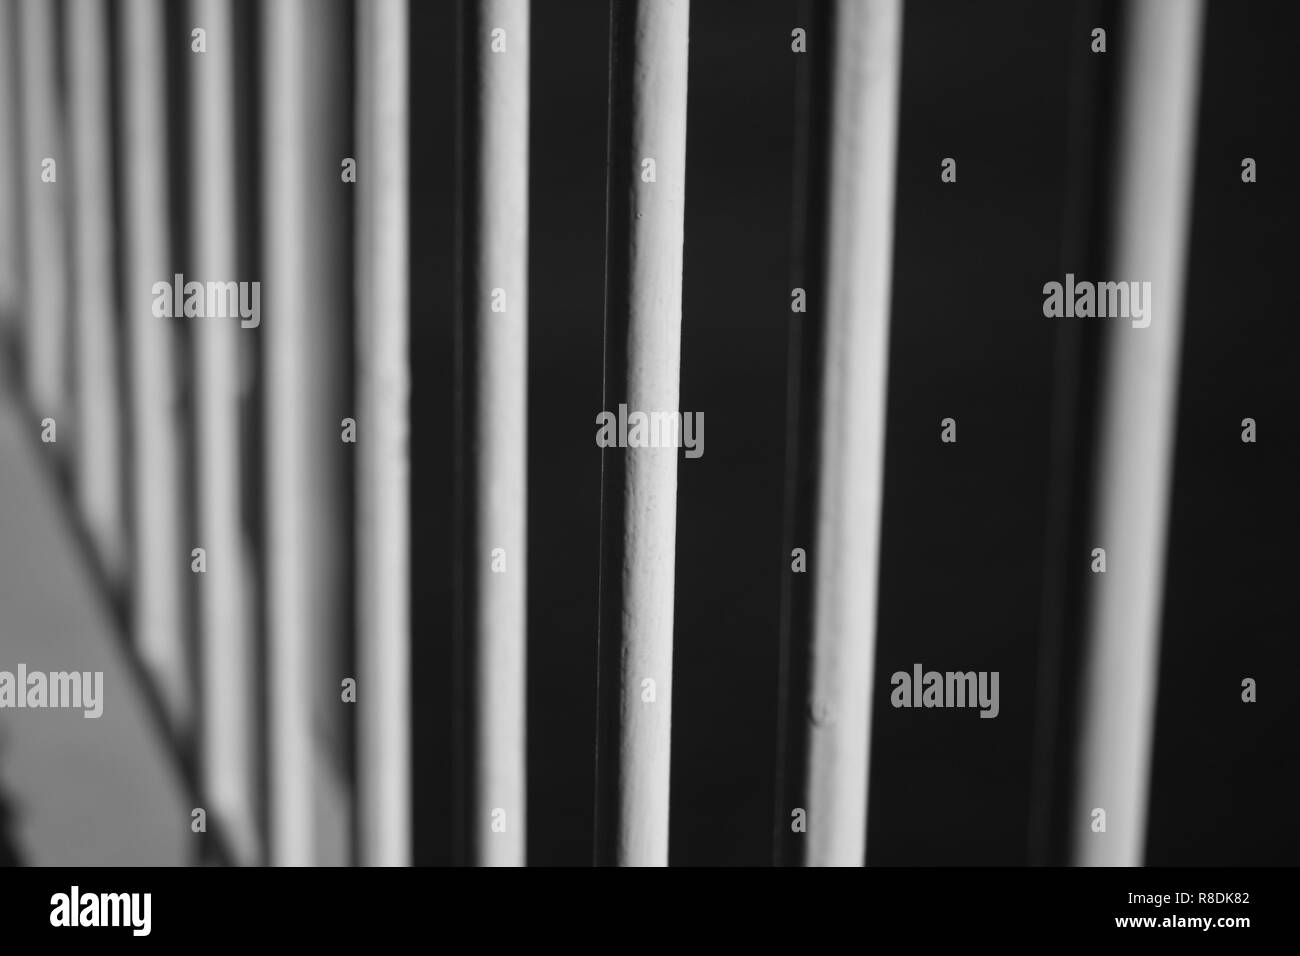 Abstract image of vertical bars in black and white monochrome photo Stock Photo